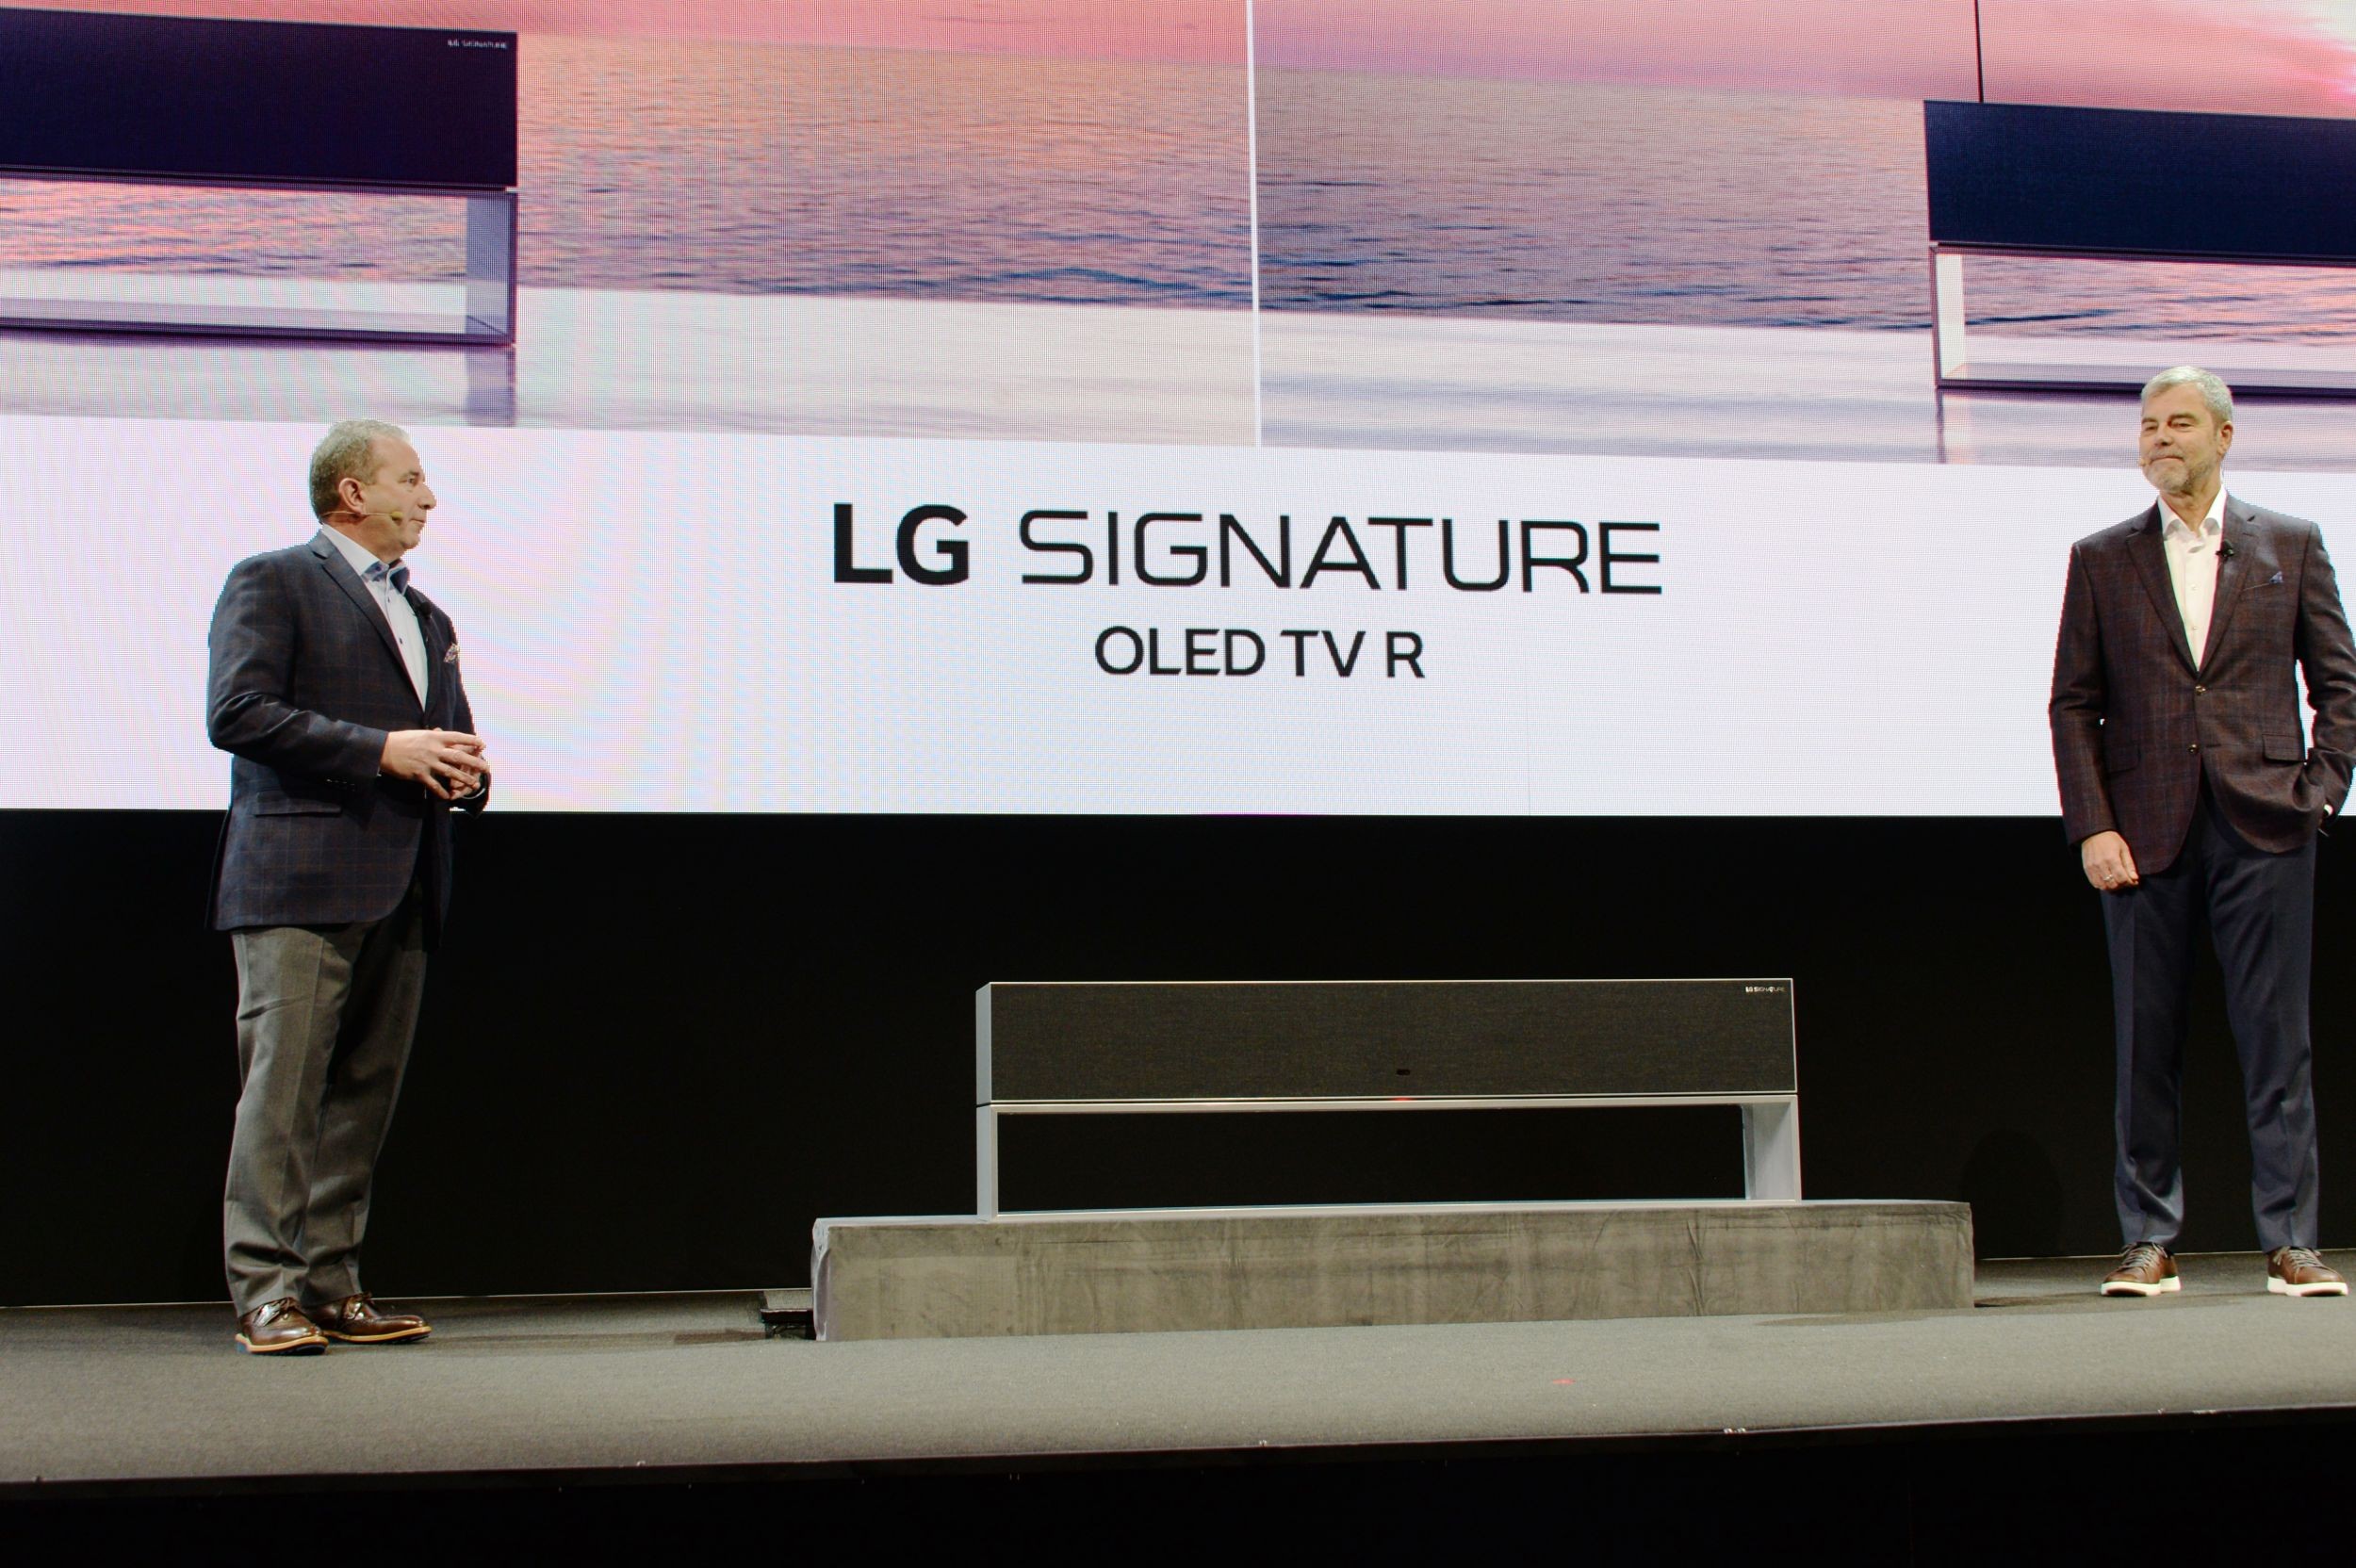 David VanderWall, Senior Vice President of Marketing at LG Electronics USA and Tim Alessi Senior Director of Product Marketing for Home Entertainment Products at LG Electronics USA are onstage discussing the LG SIGNATURE OLED TV R at LG's CES 2019 Press Conference while putting the TV between them.